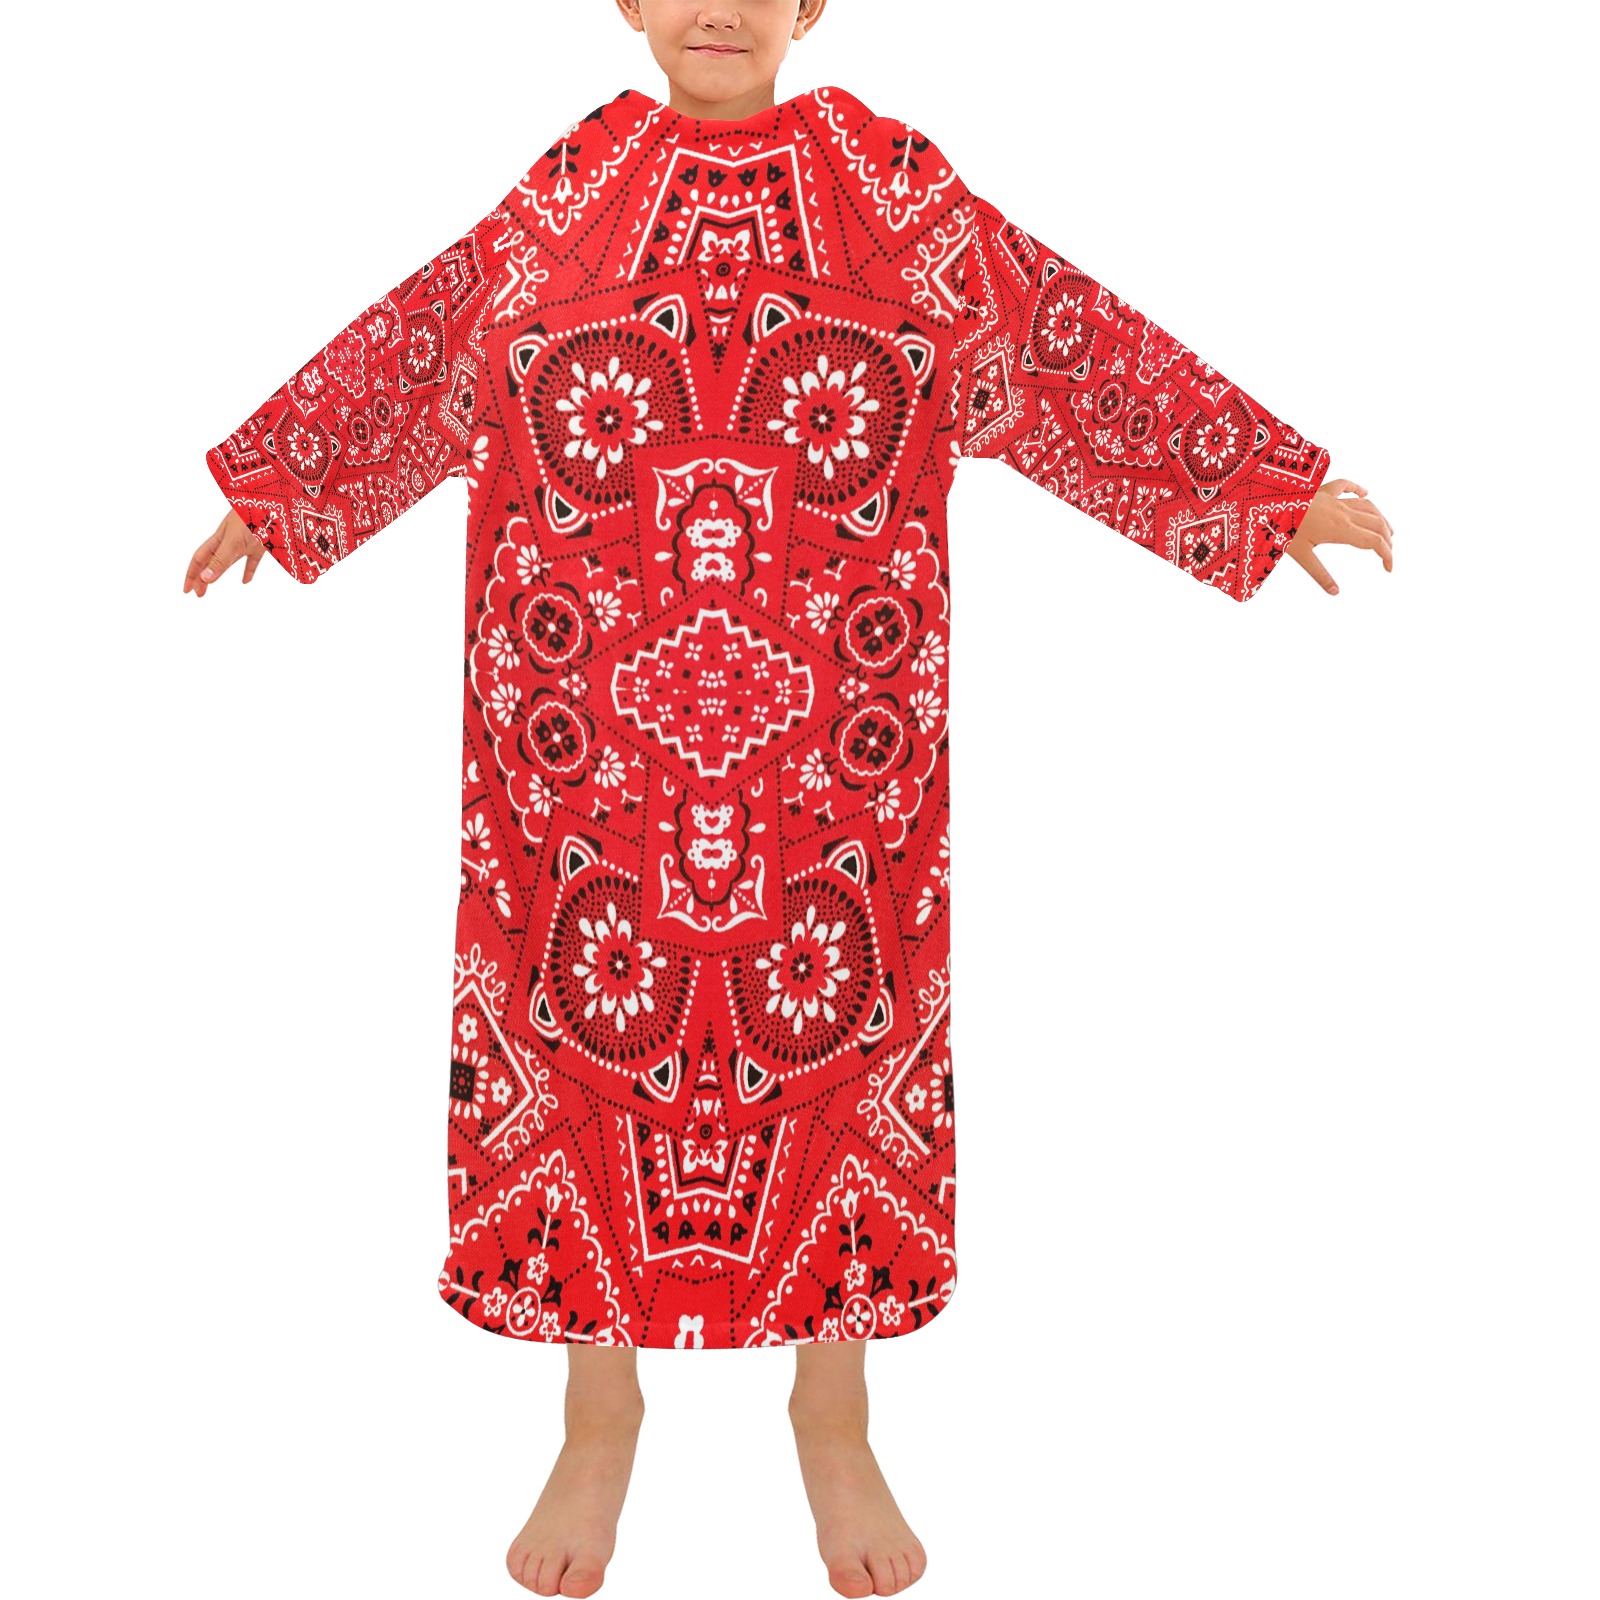 Red Bandana Squares Blanket Robe with Sleeves for Kids